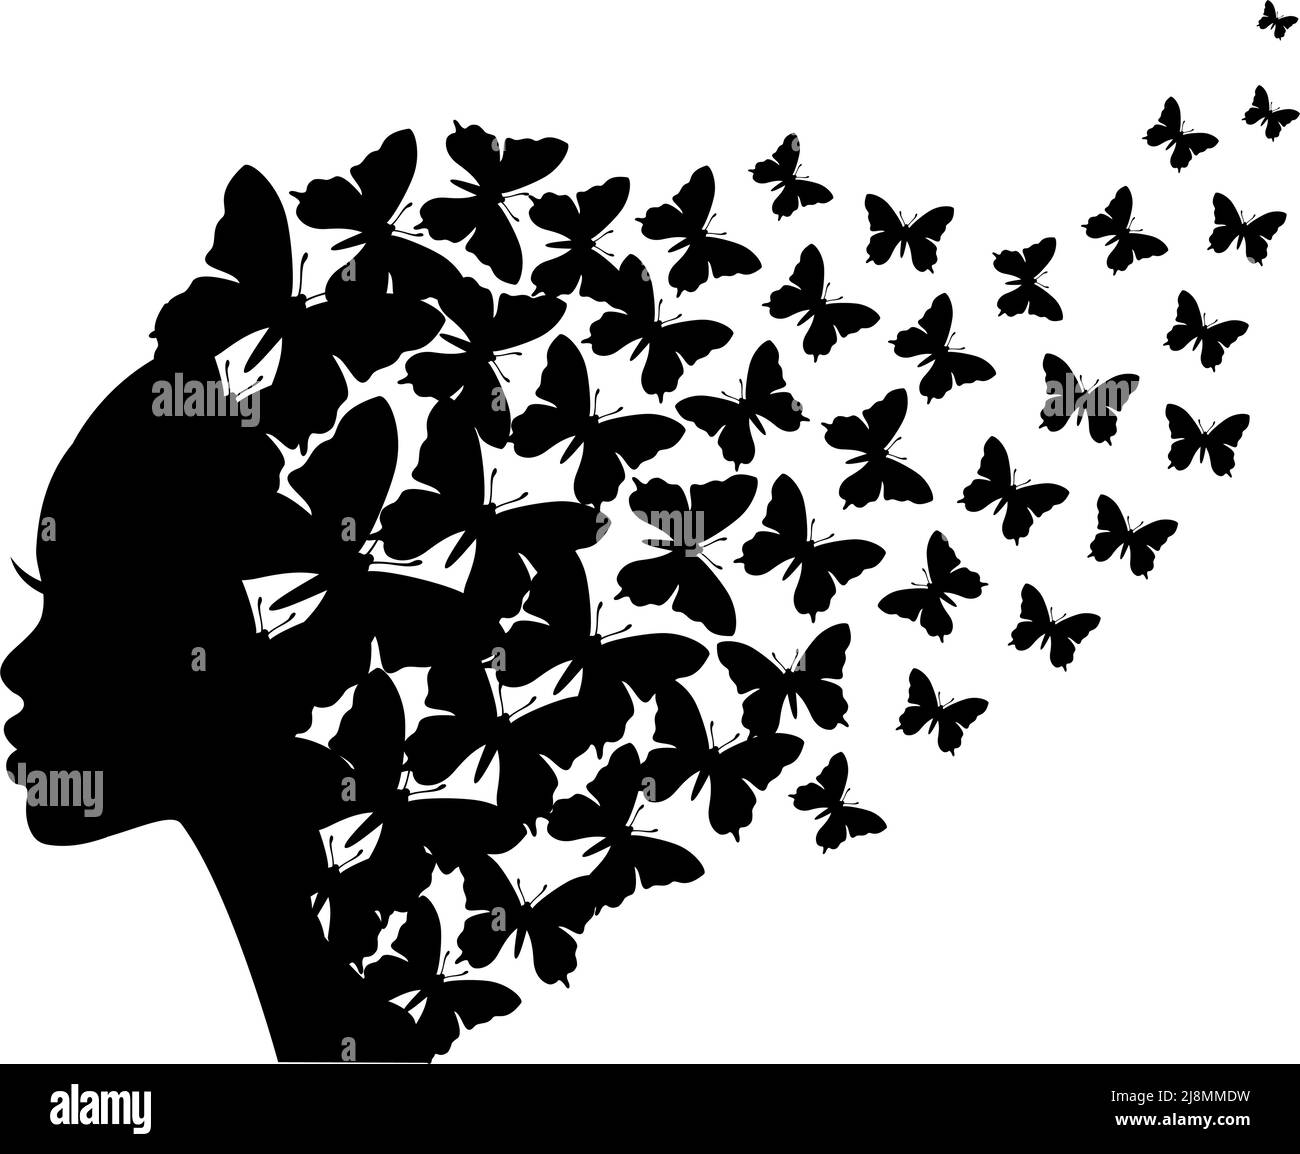 Beautiful black woman silhouette with flying butterflies, vector illustration over white background Stock Vector